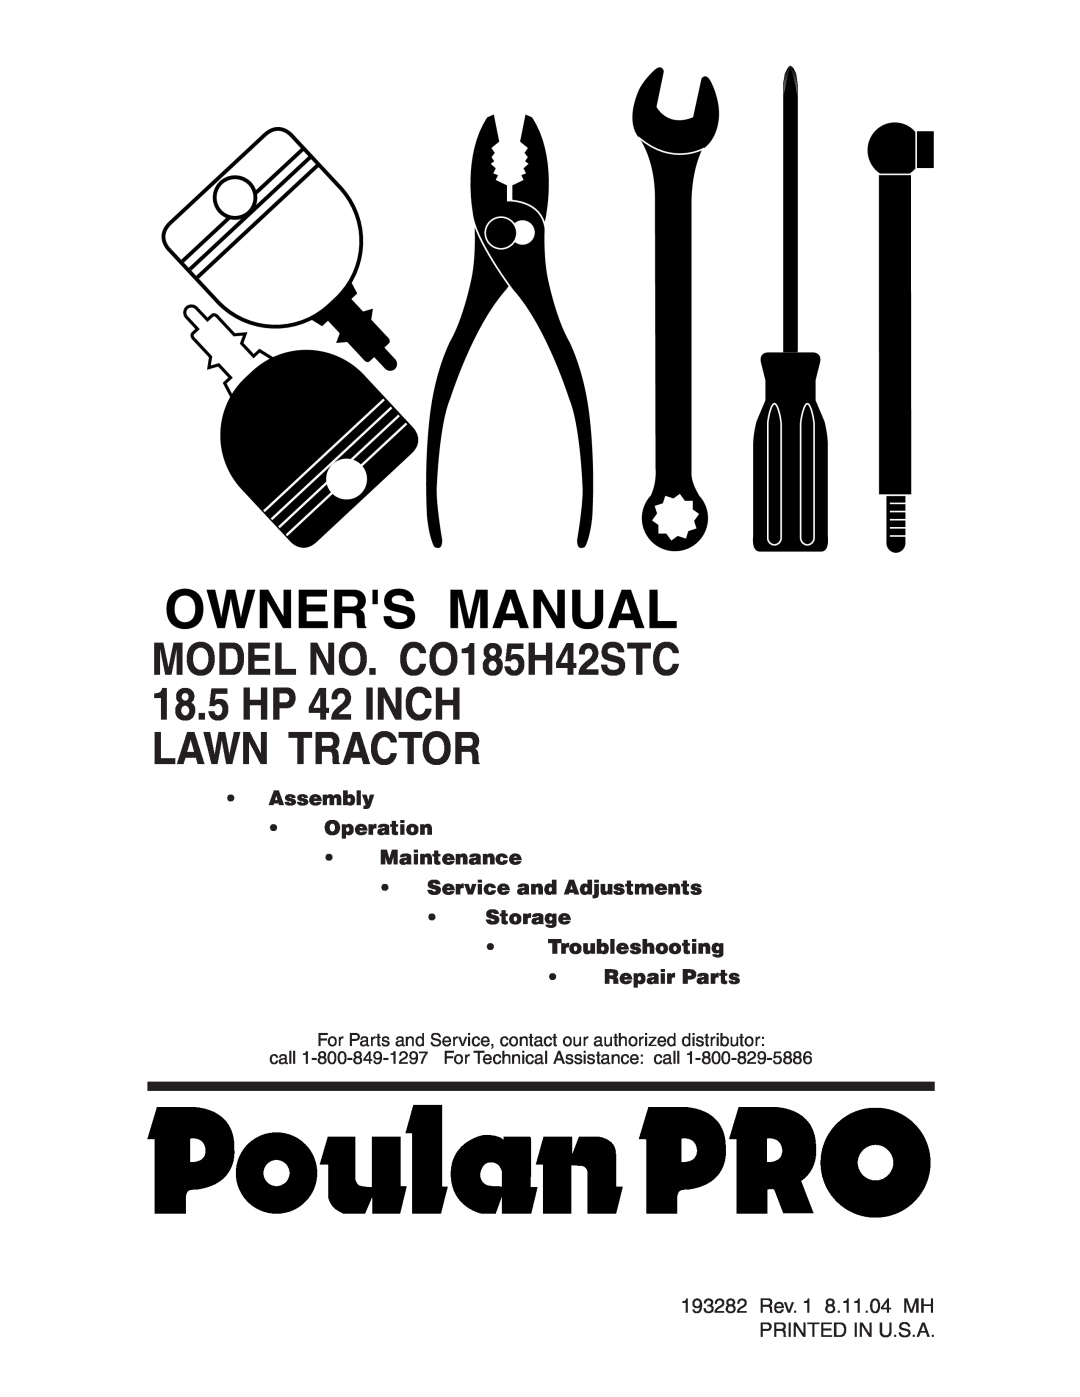 Poulan manual MODEL NO. CO185H42STC, 18.5HP 42 INCH LAWN TRACTOR, •Assembly • Operation • Maintenance 